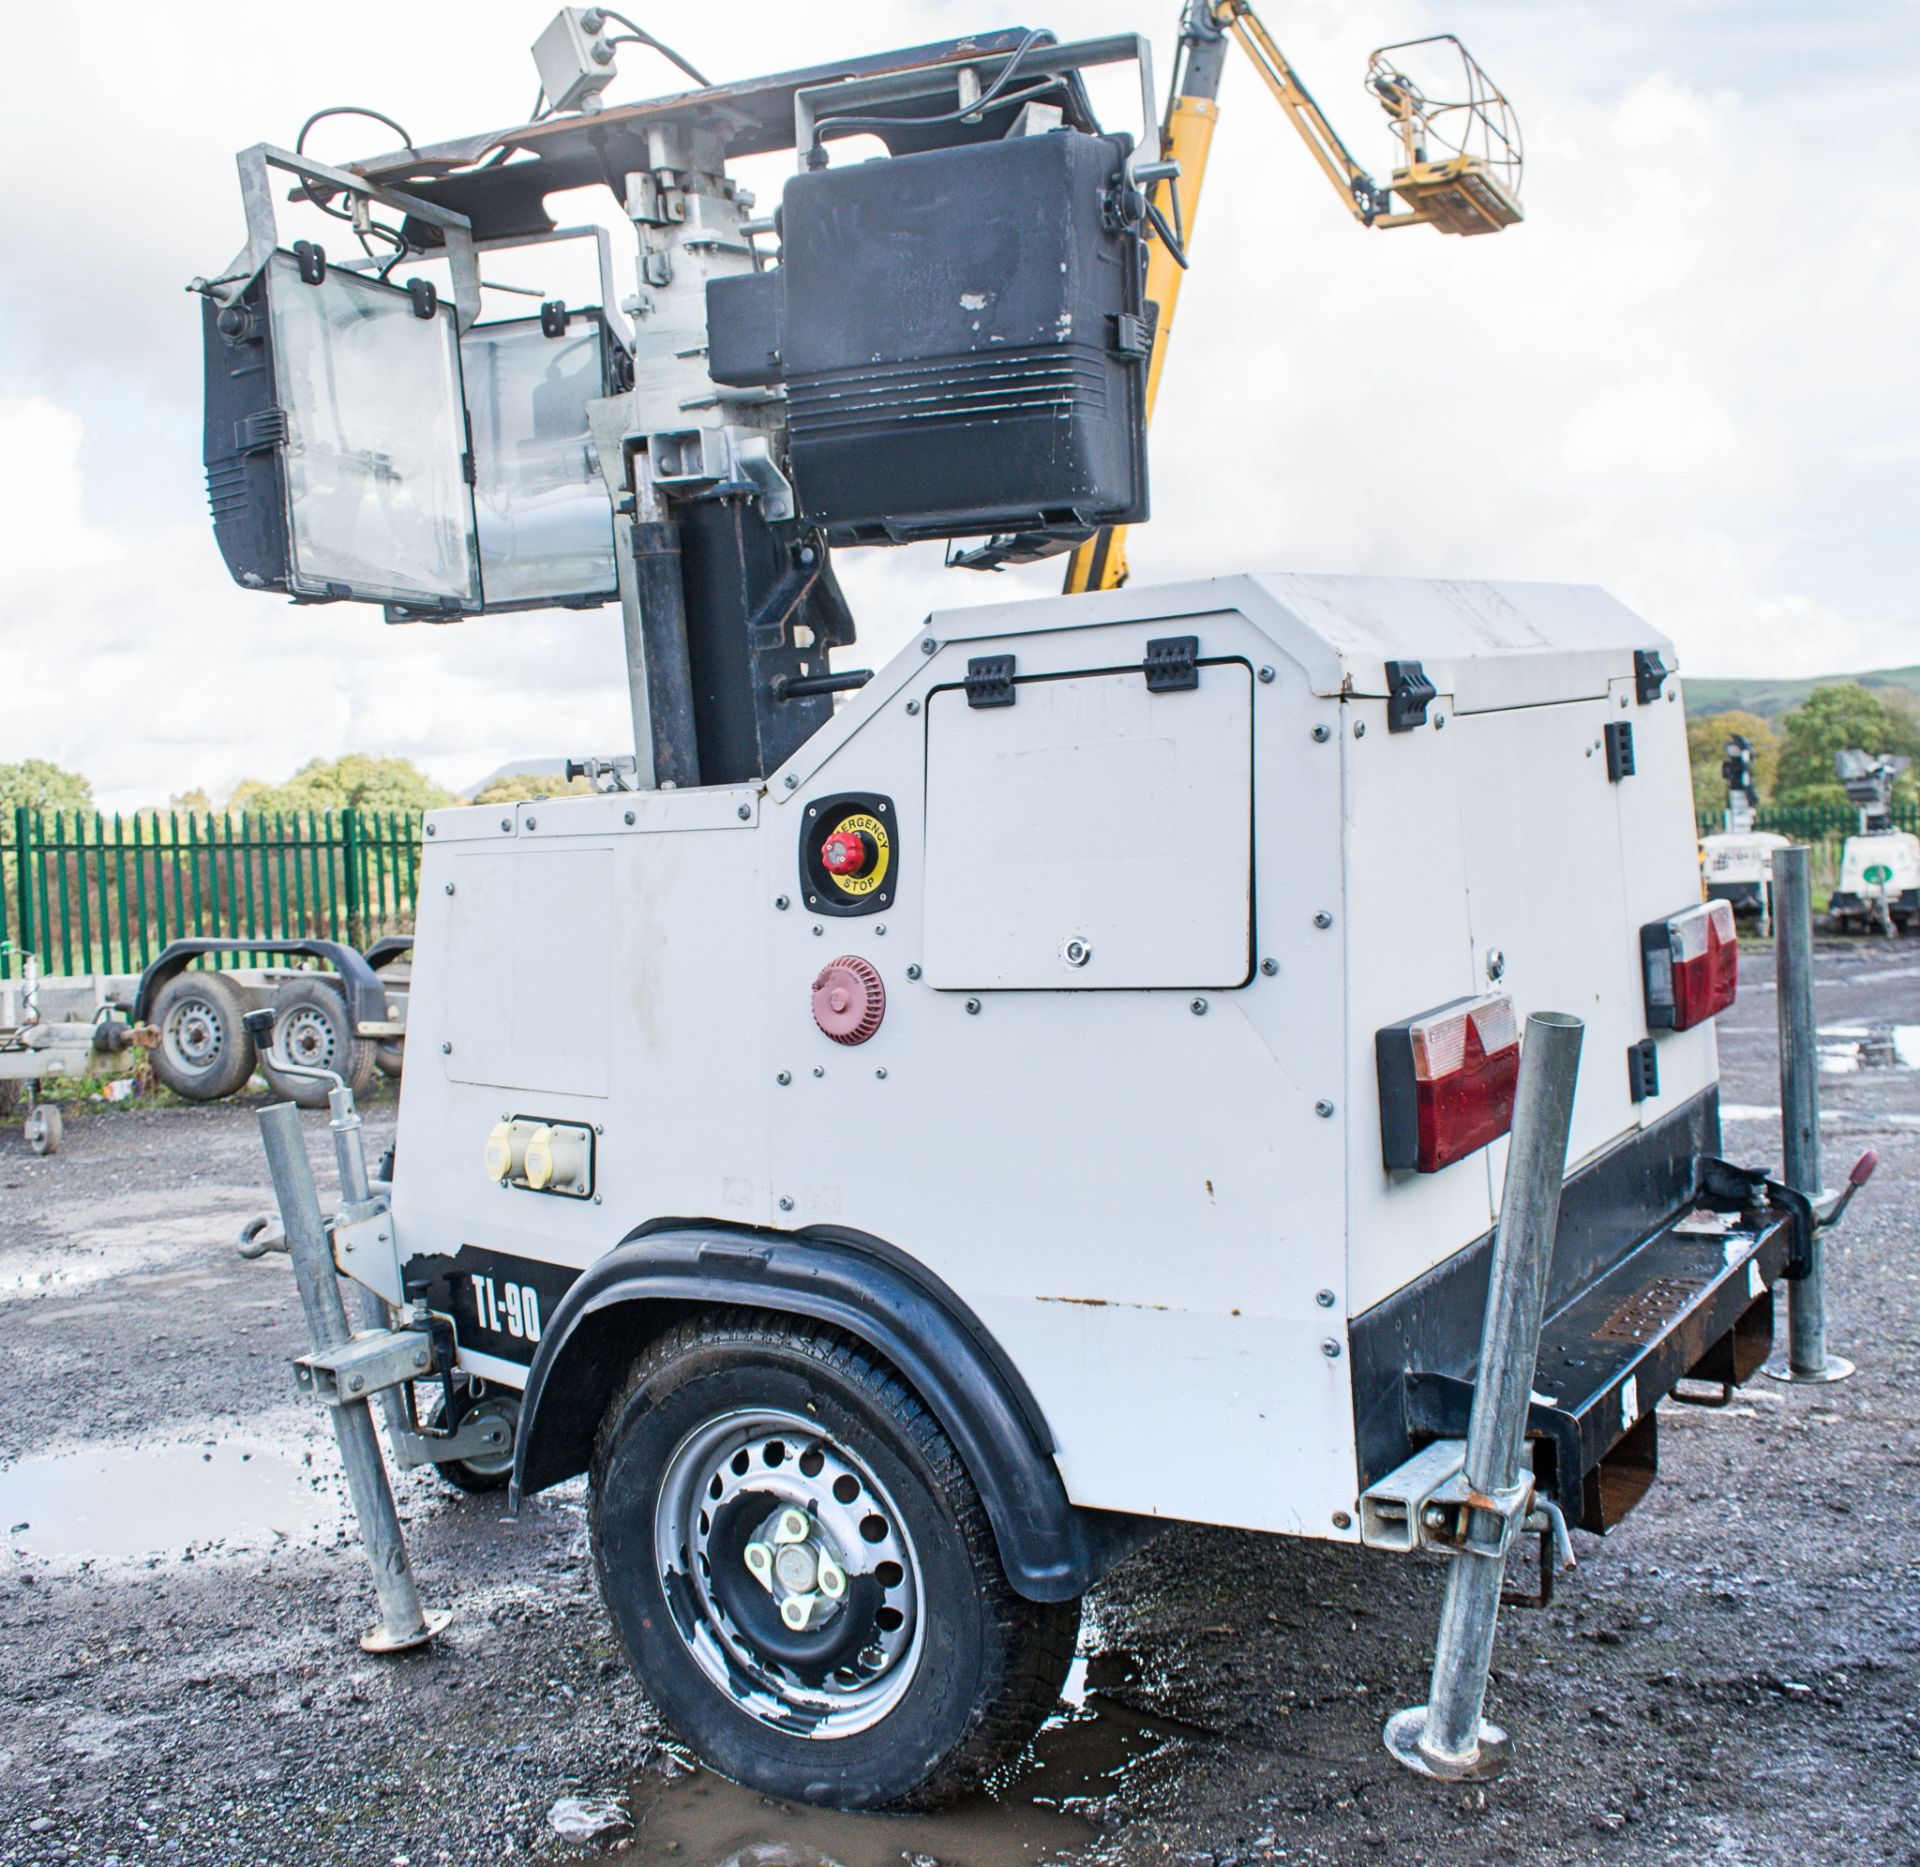 SMC TL-90 diesel driven mobile lighting tower  Year: 2012 S/N: 129657 Recorded hours: 5835 A593319 - Image 4 of 8